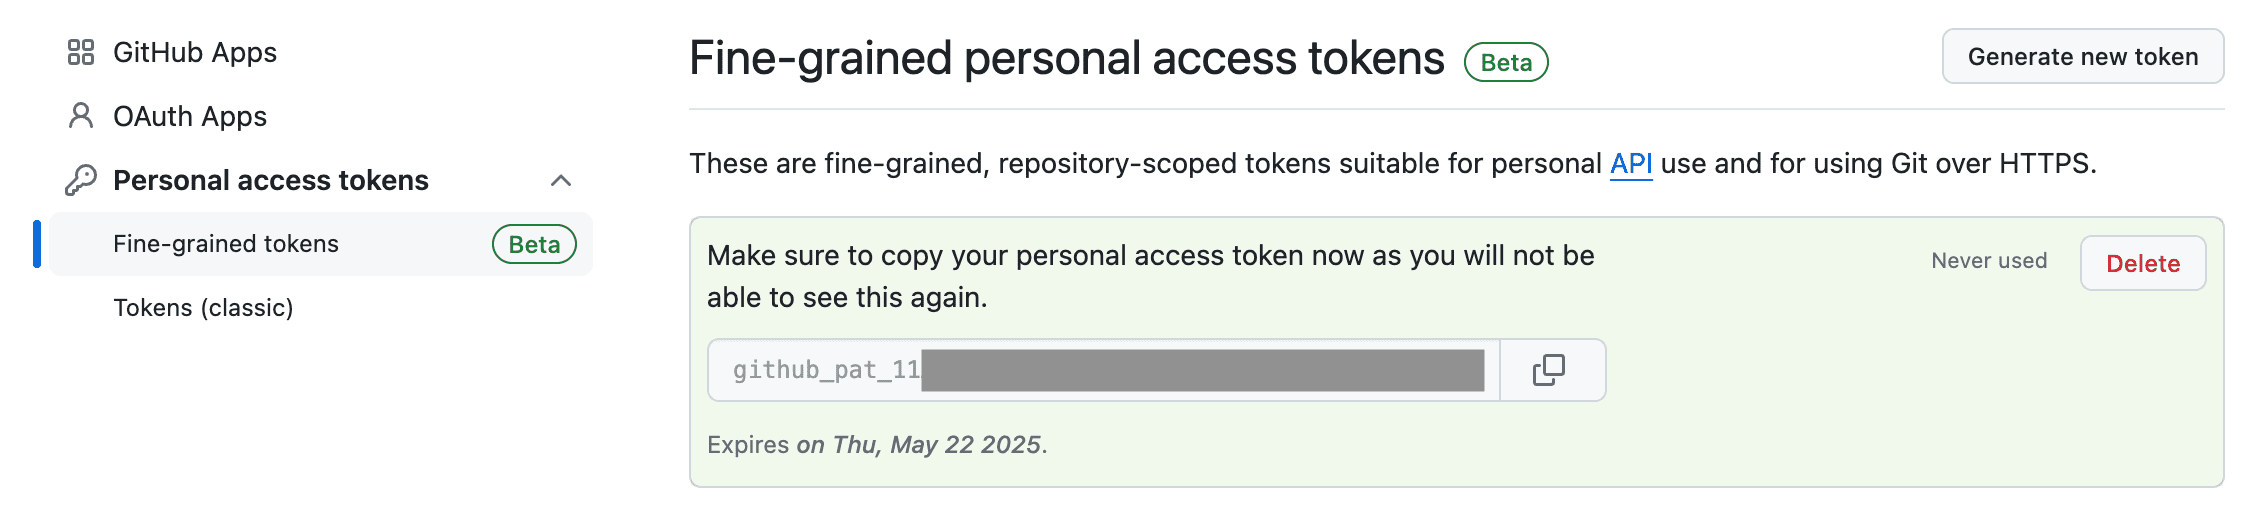 Newly generated token in GitHub